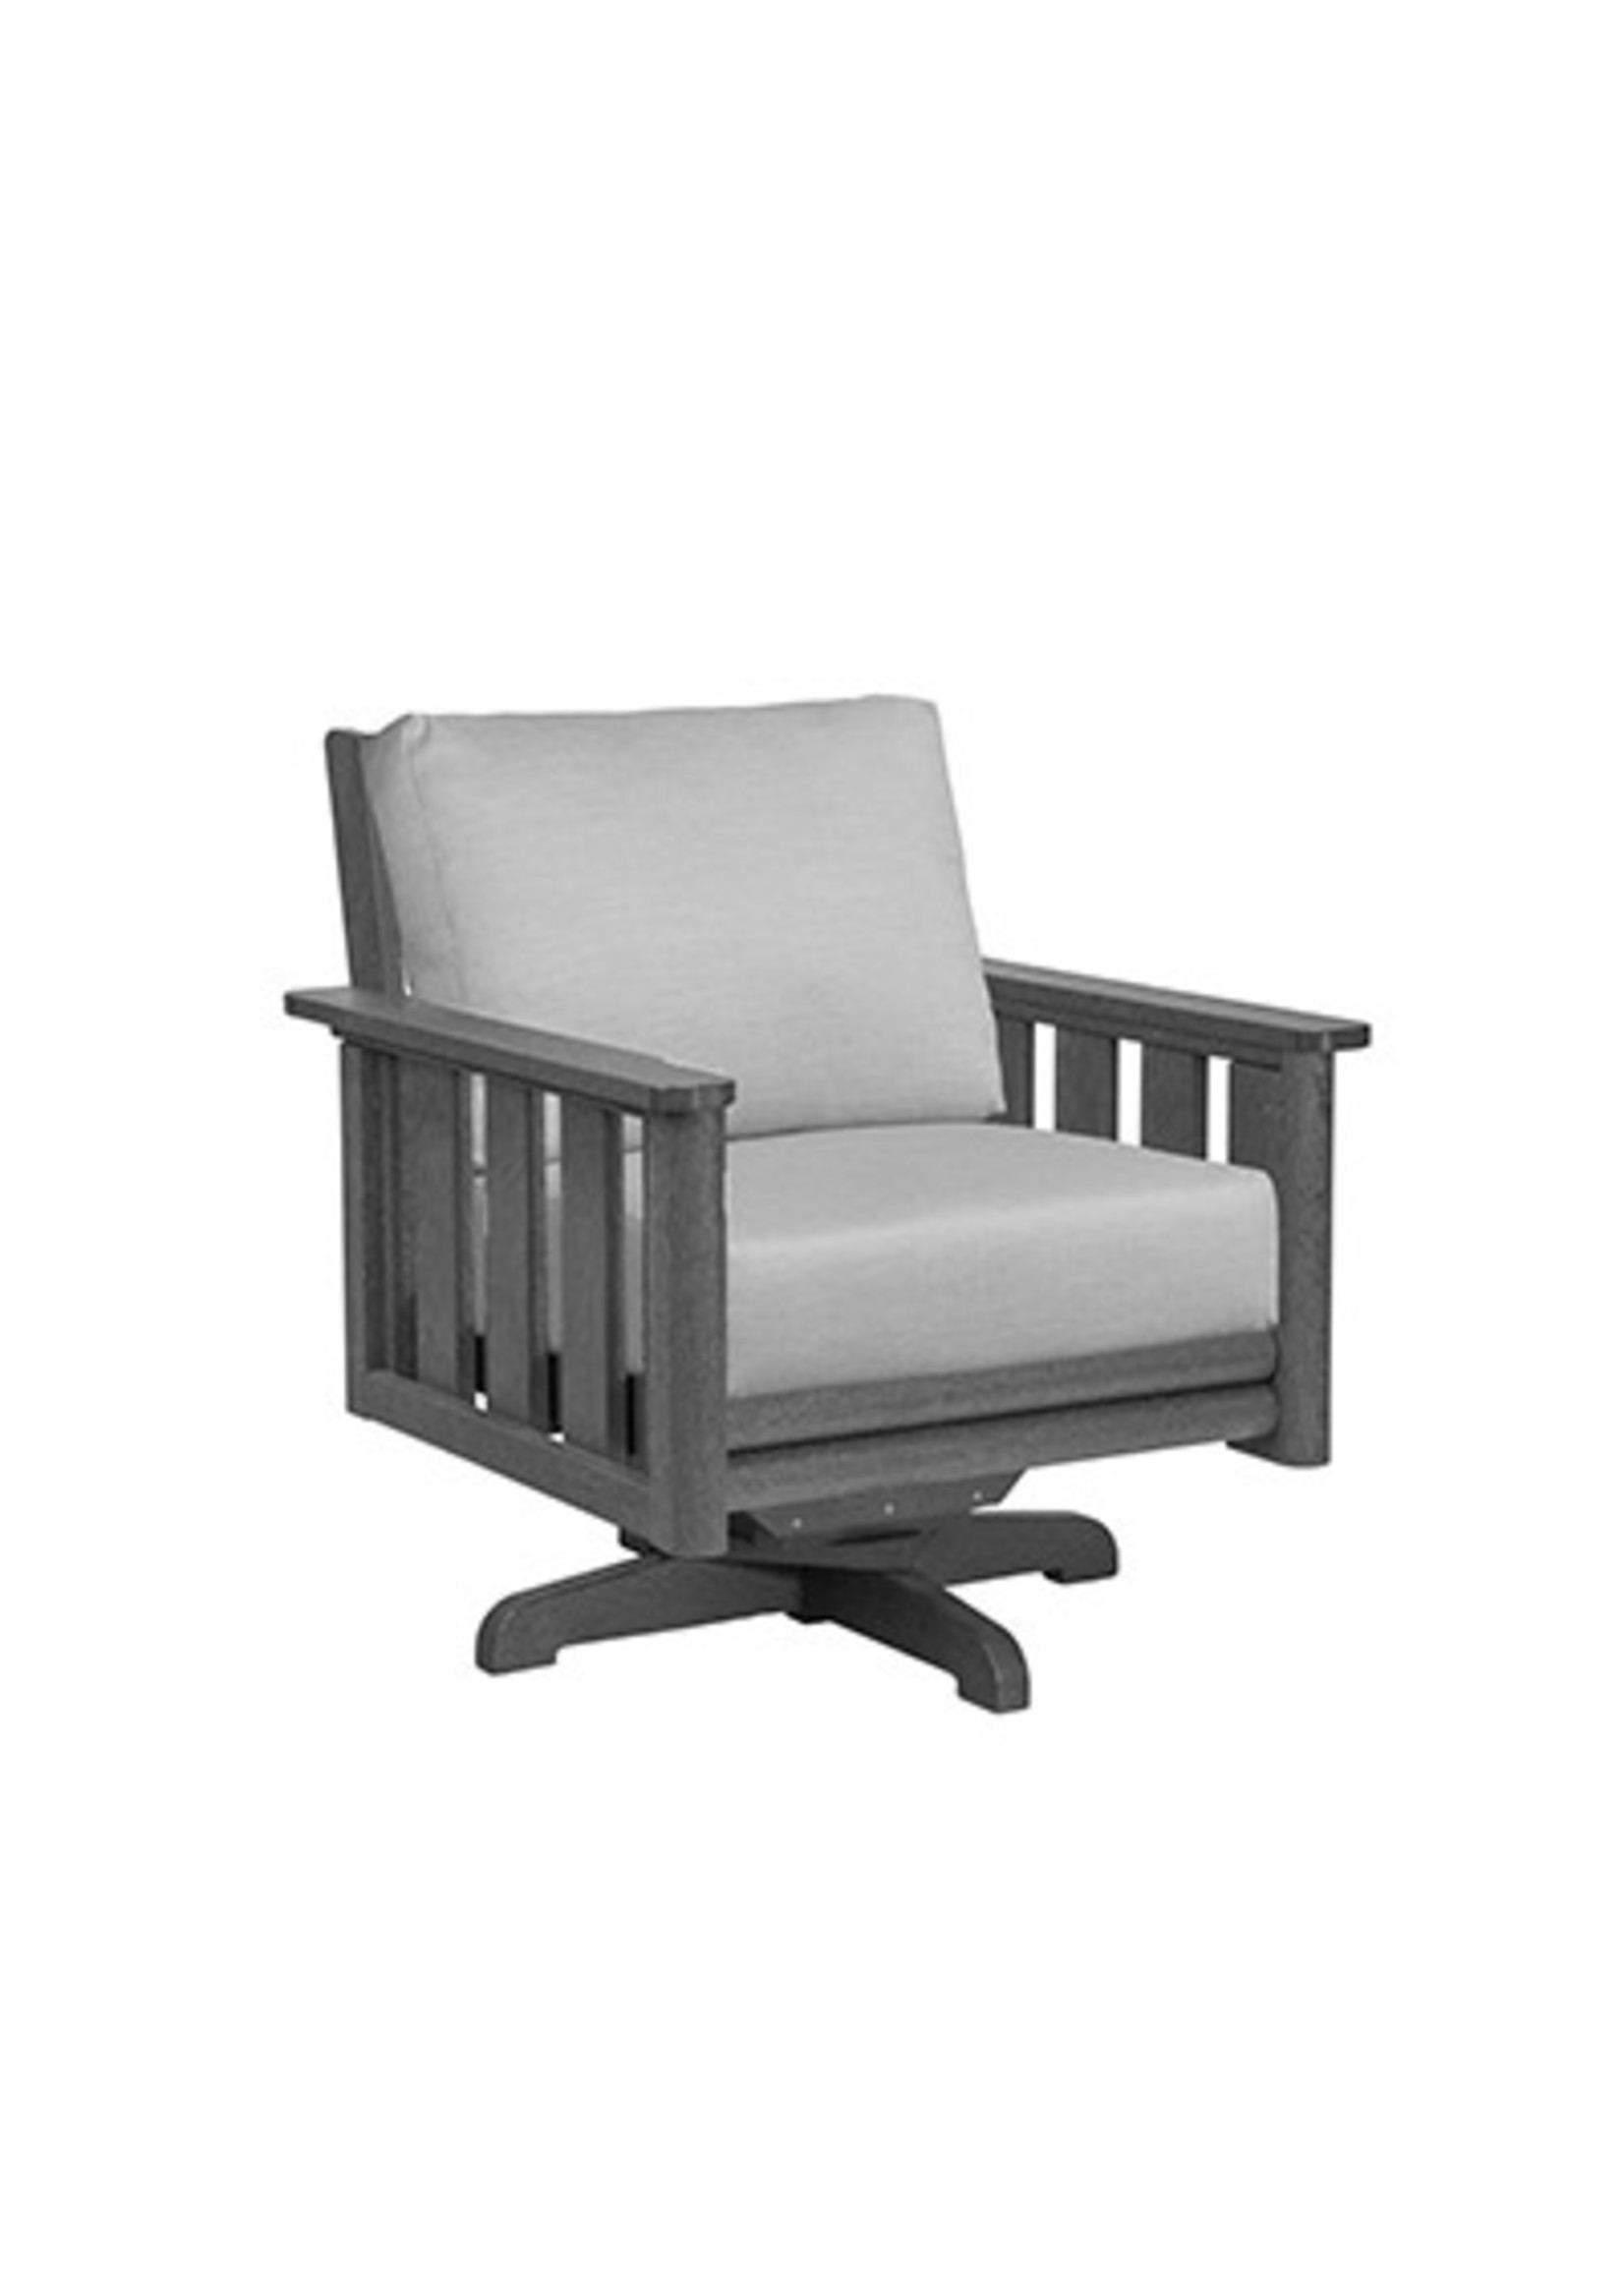 C.R. Plastic Products DSF264 * Stratford Swivel Armchair